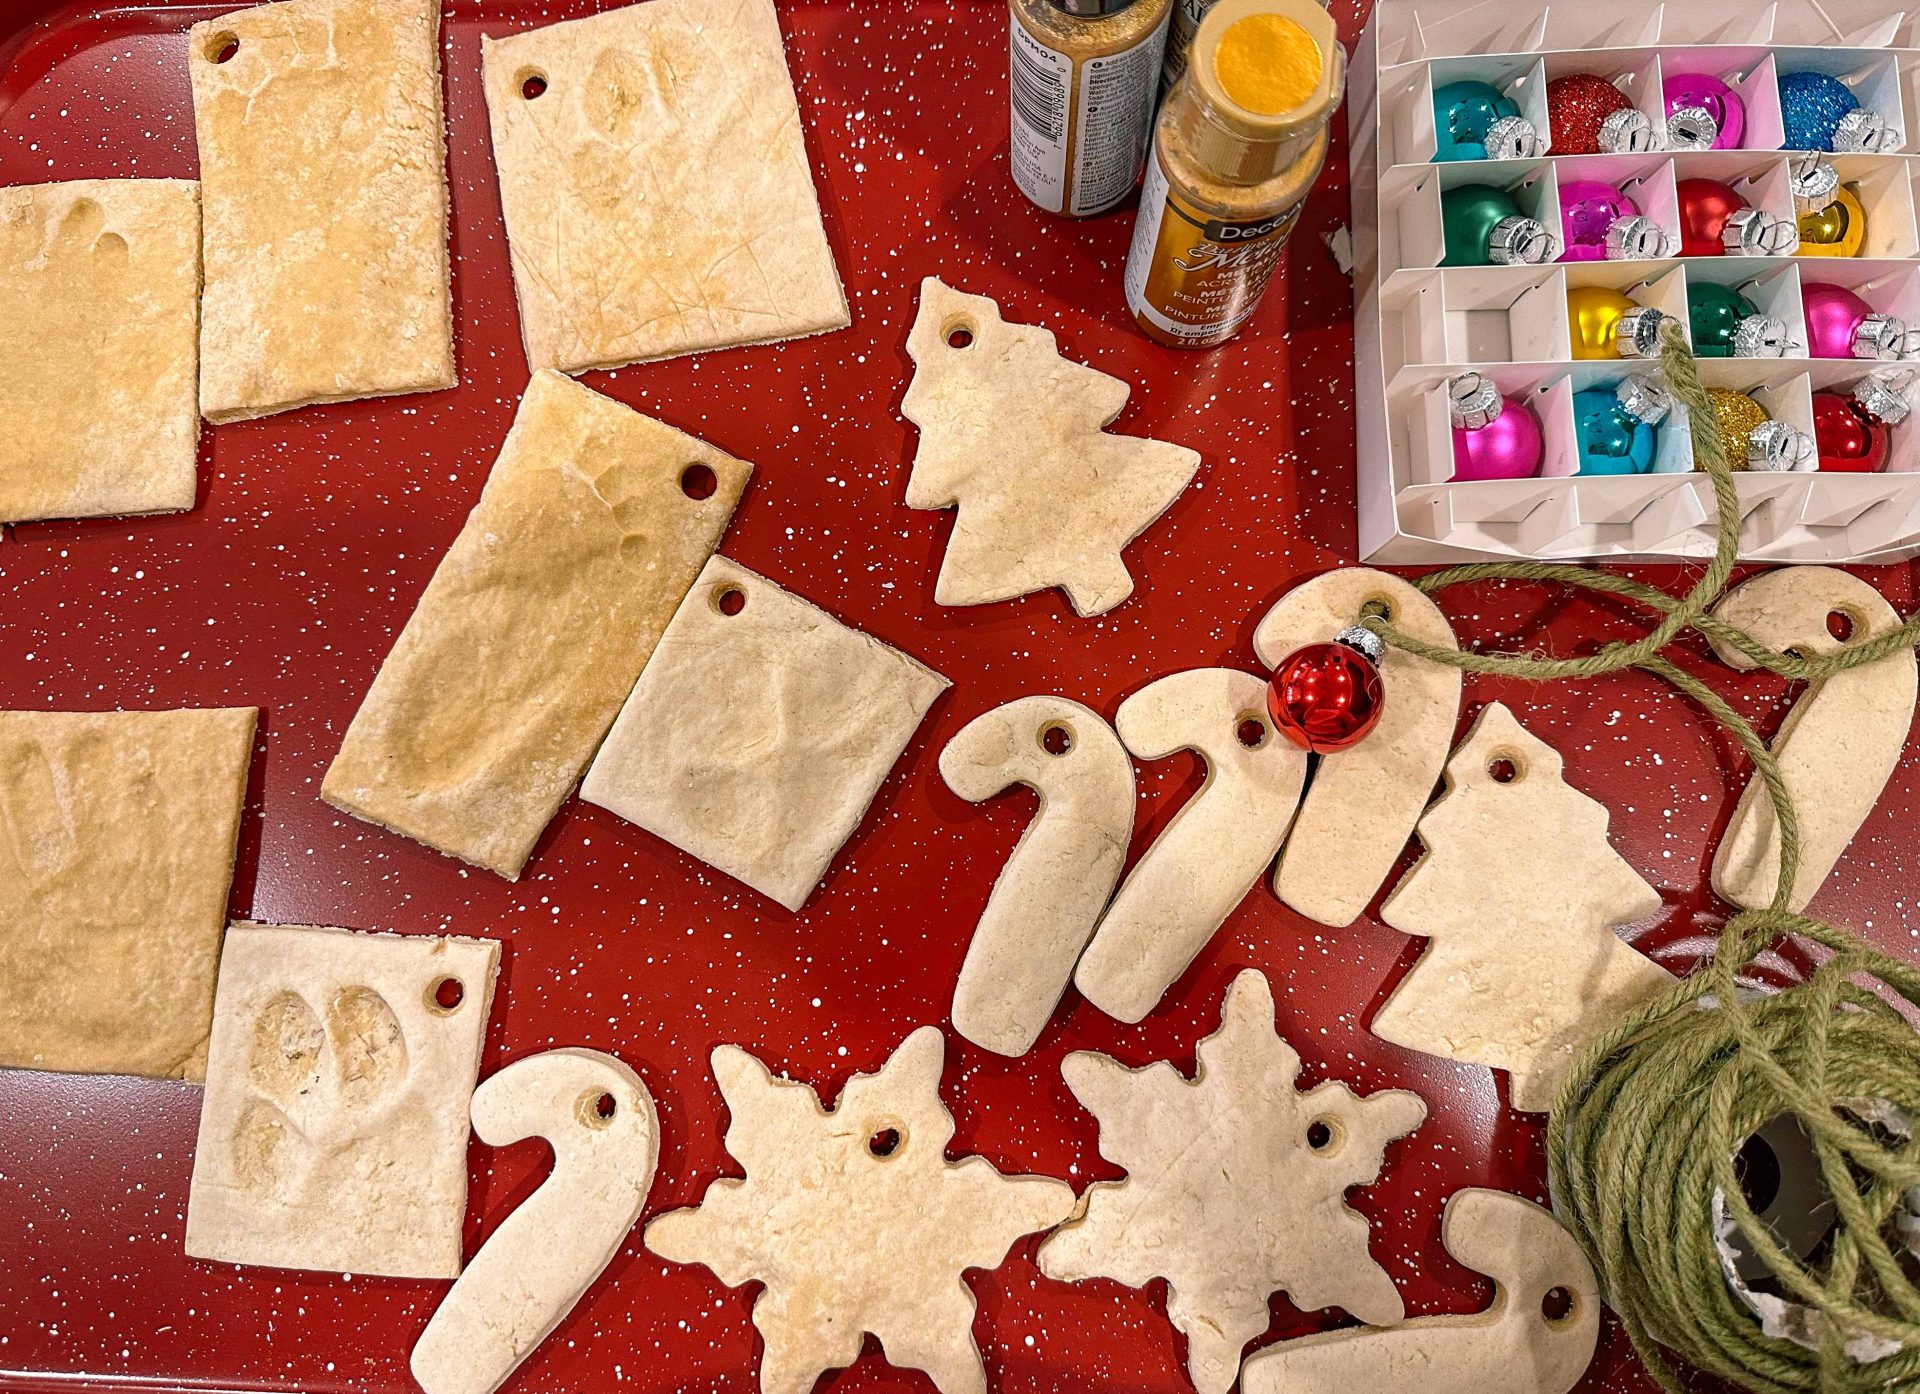 homemade ornaments, ornament dough, flour and salt water ornaments, homemade handprints, ornaments for grandma, ornaments for mom, easy baby ornaments, budget friendly gifts, easy gifts for friends, inexpensive gifts, homemade gifts, grandma, mom, dad, baby footprint, dog footprint, ornaments, Christmas, holidays, baked ornaments, custom, crafting